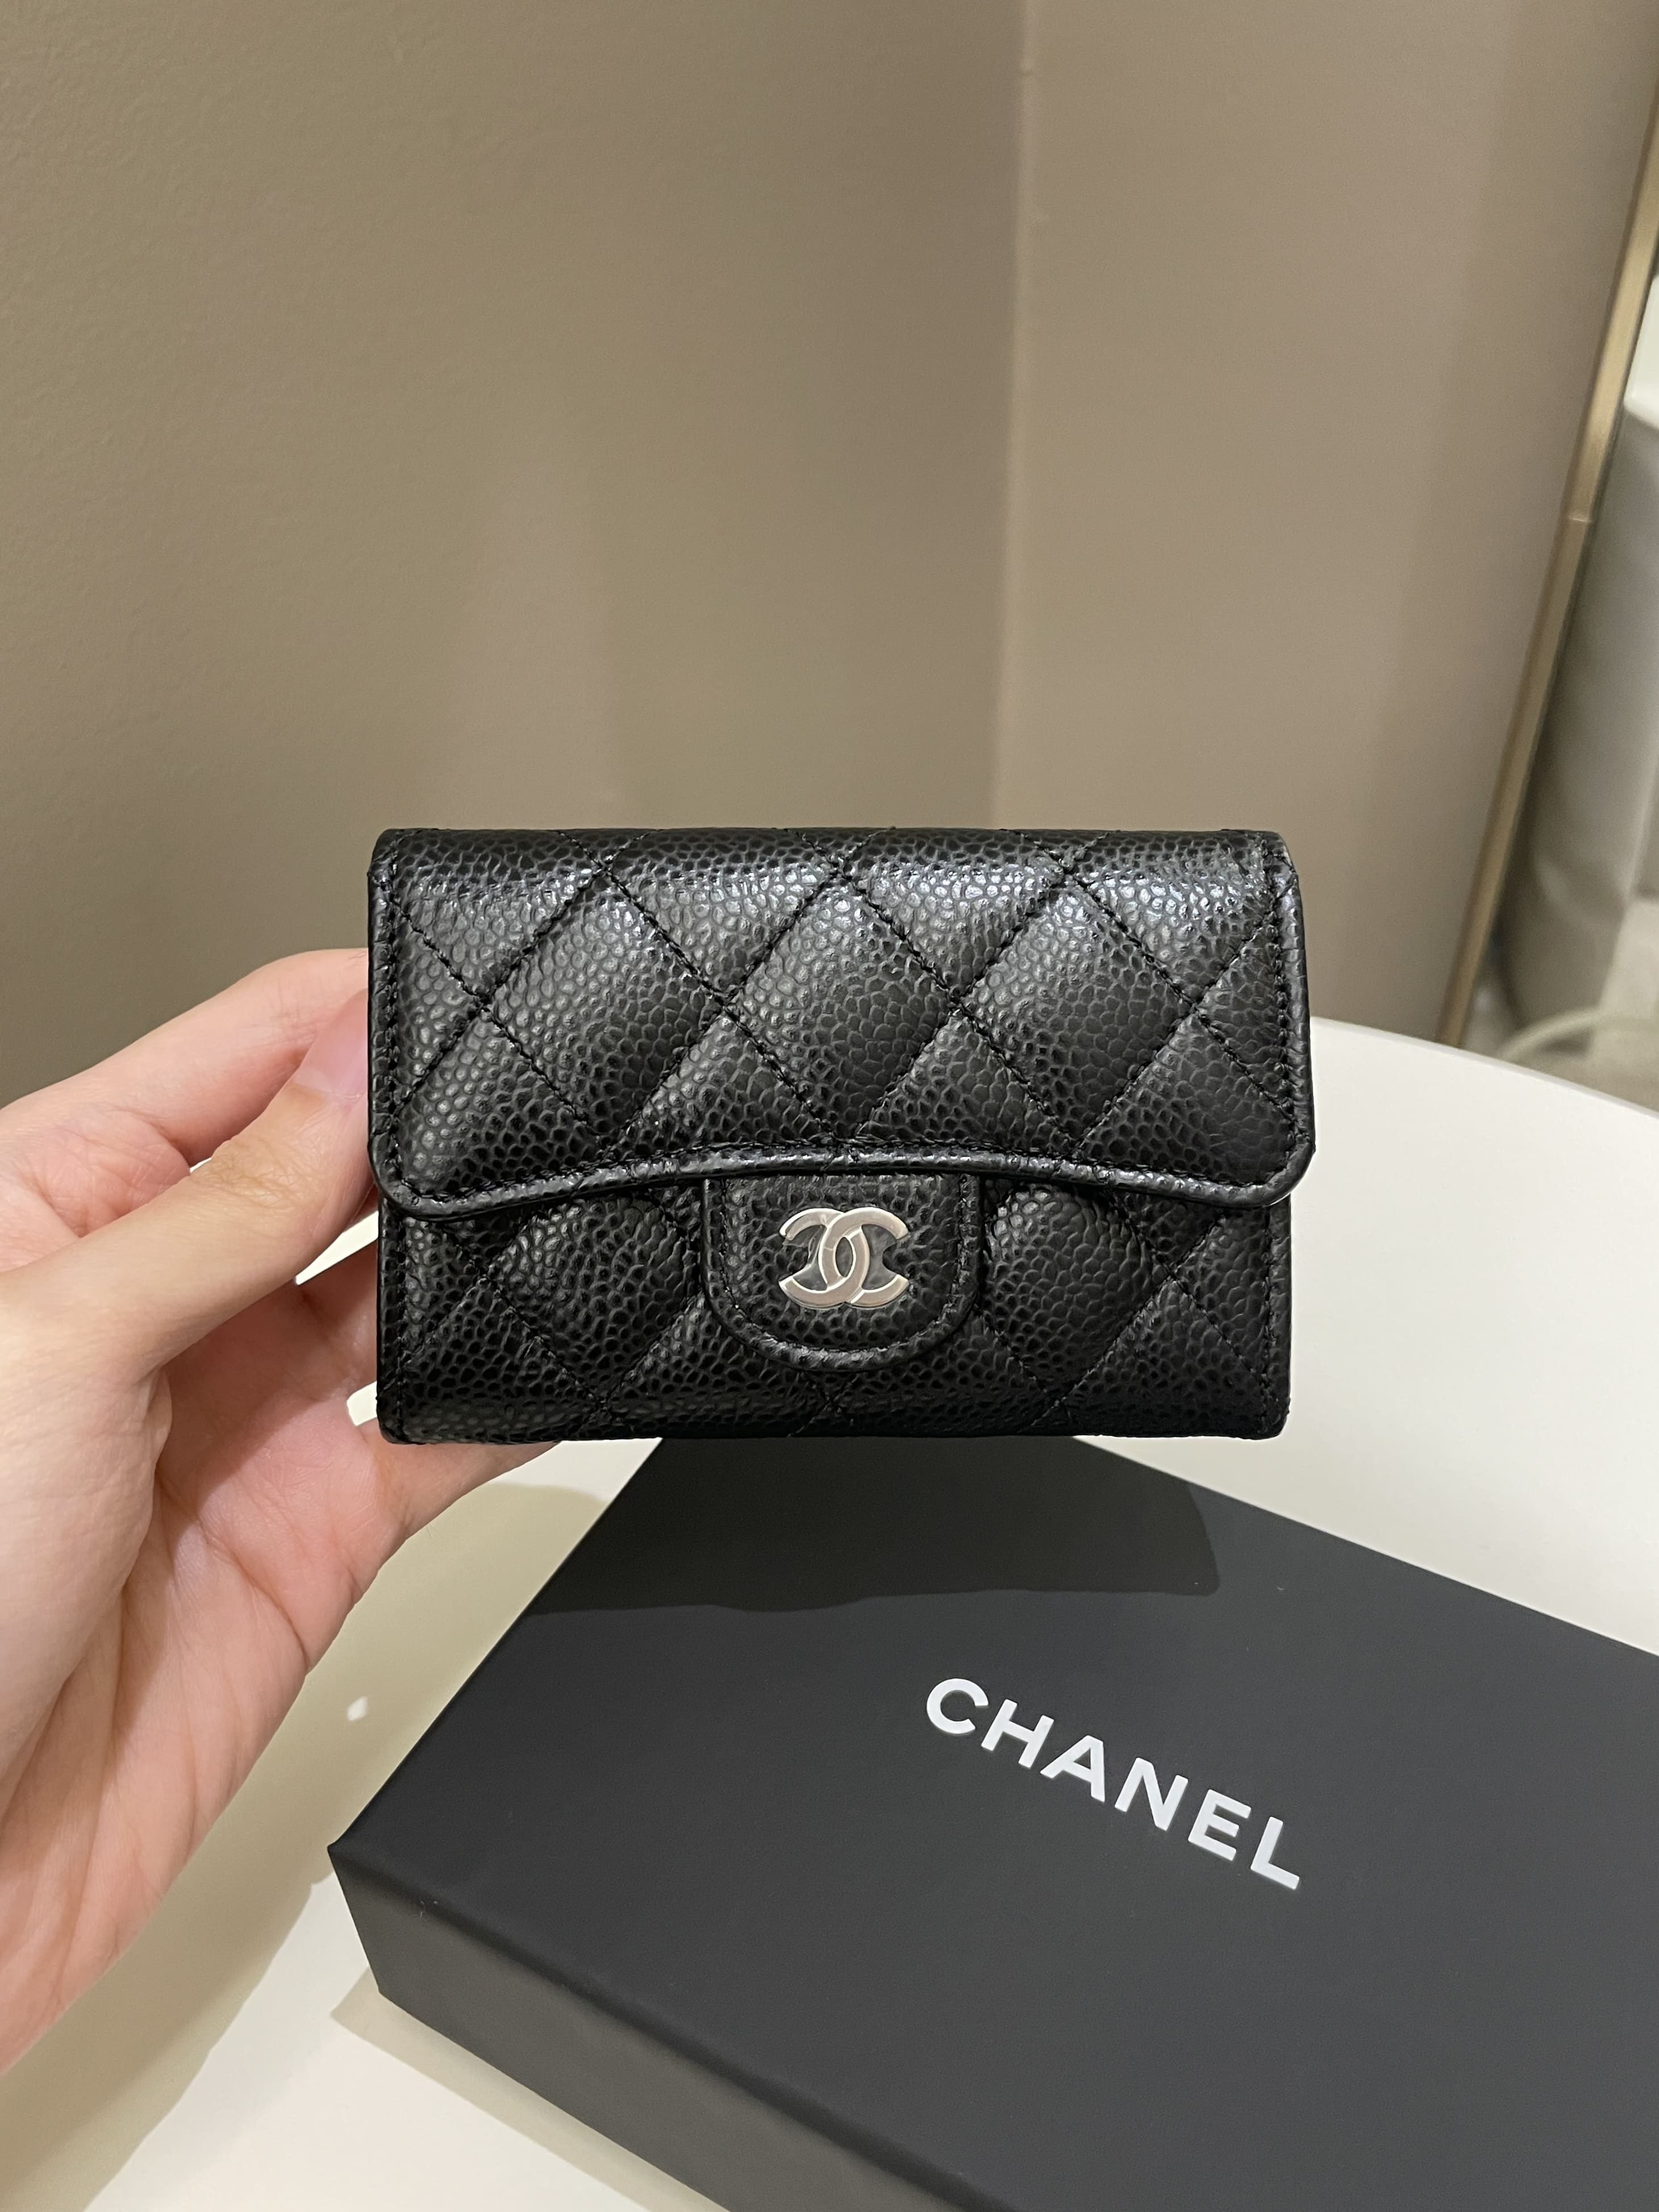 Authentic CHANEL Classic Flap Card Holder Black Caviar Leather SHW Brand New